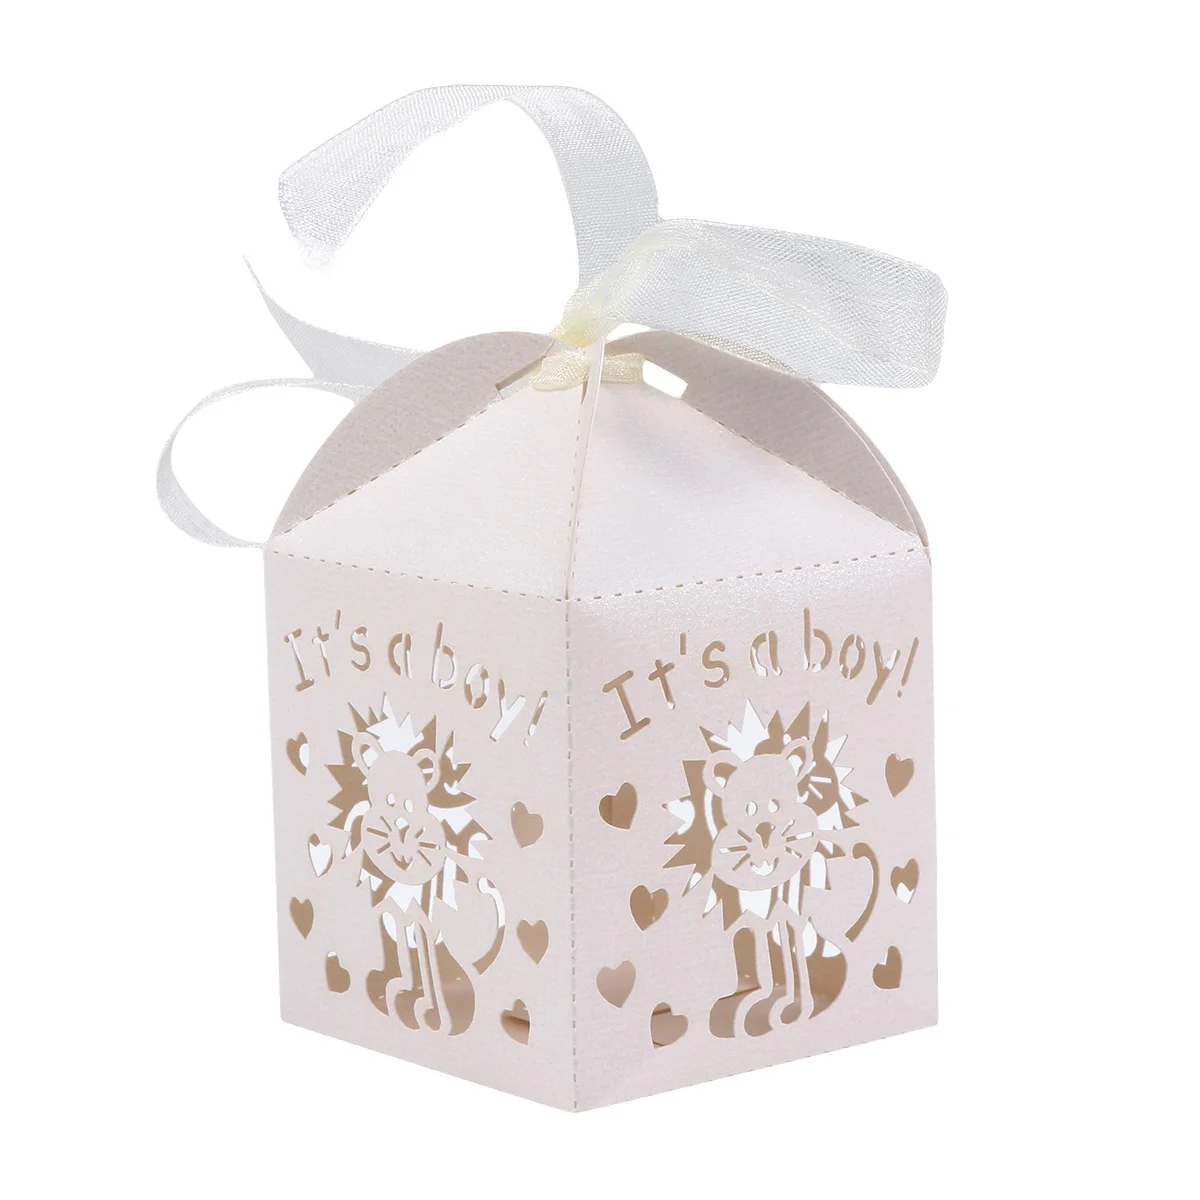 

Boxes Box Favor Wedding Gift Party Hollow Candypaper Outshower Baby Reveal Gender Craft Chocolate Packaging Carriage Treat